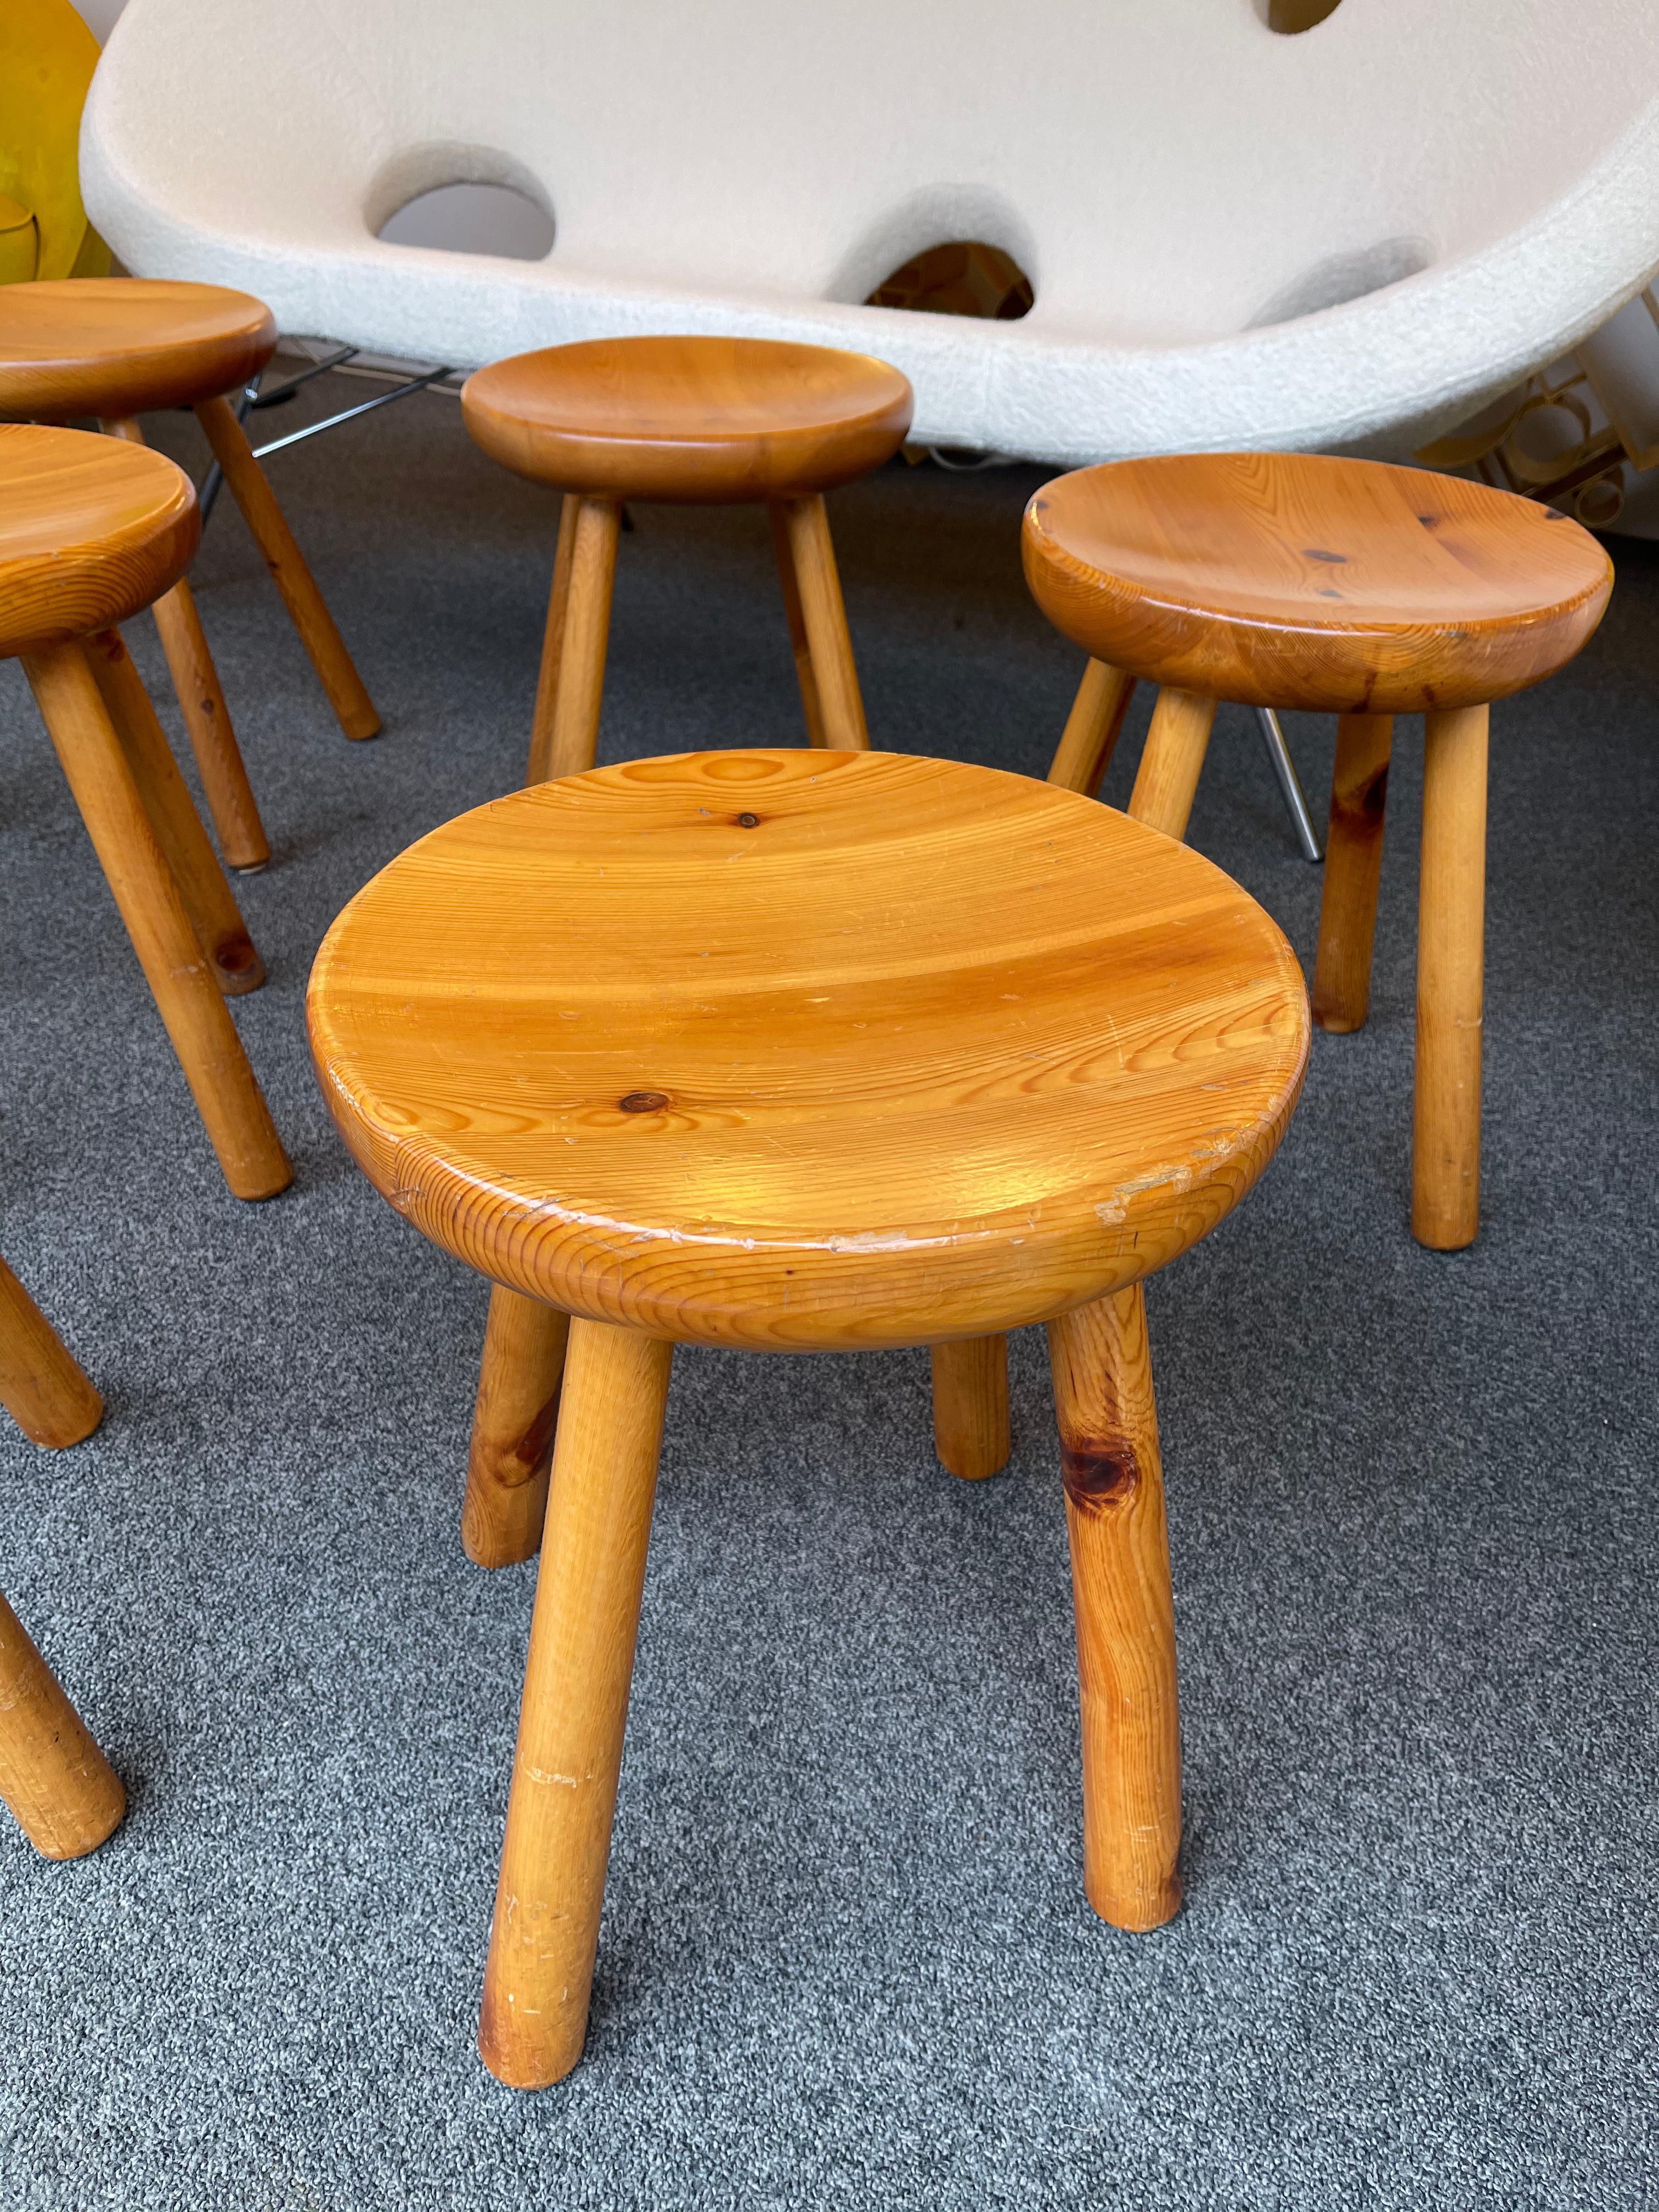 Wood Pine Stool Attributed to Charlotte Perriand, France, 1960s For Sale